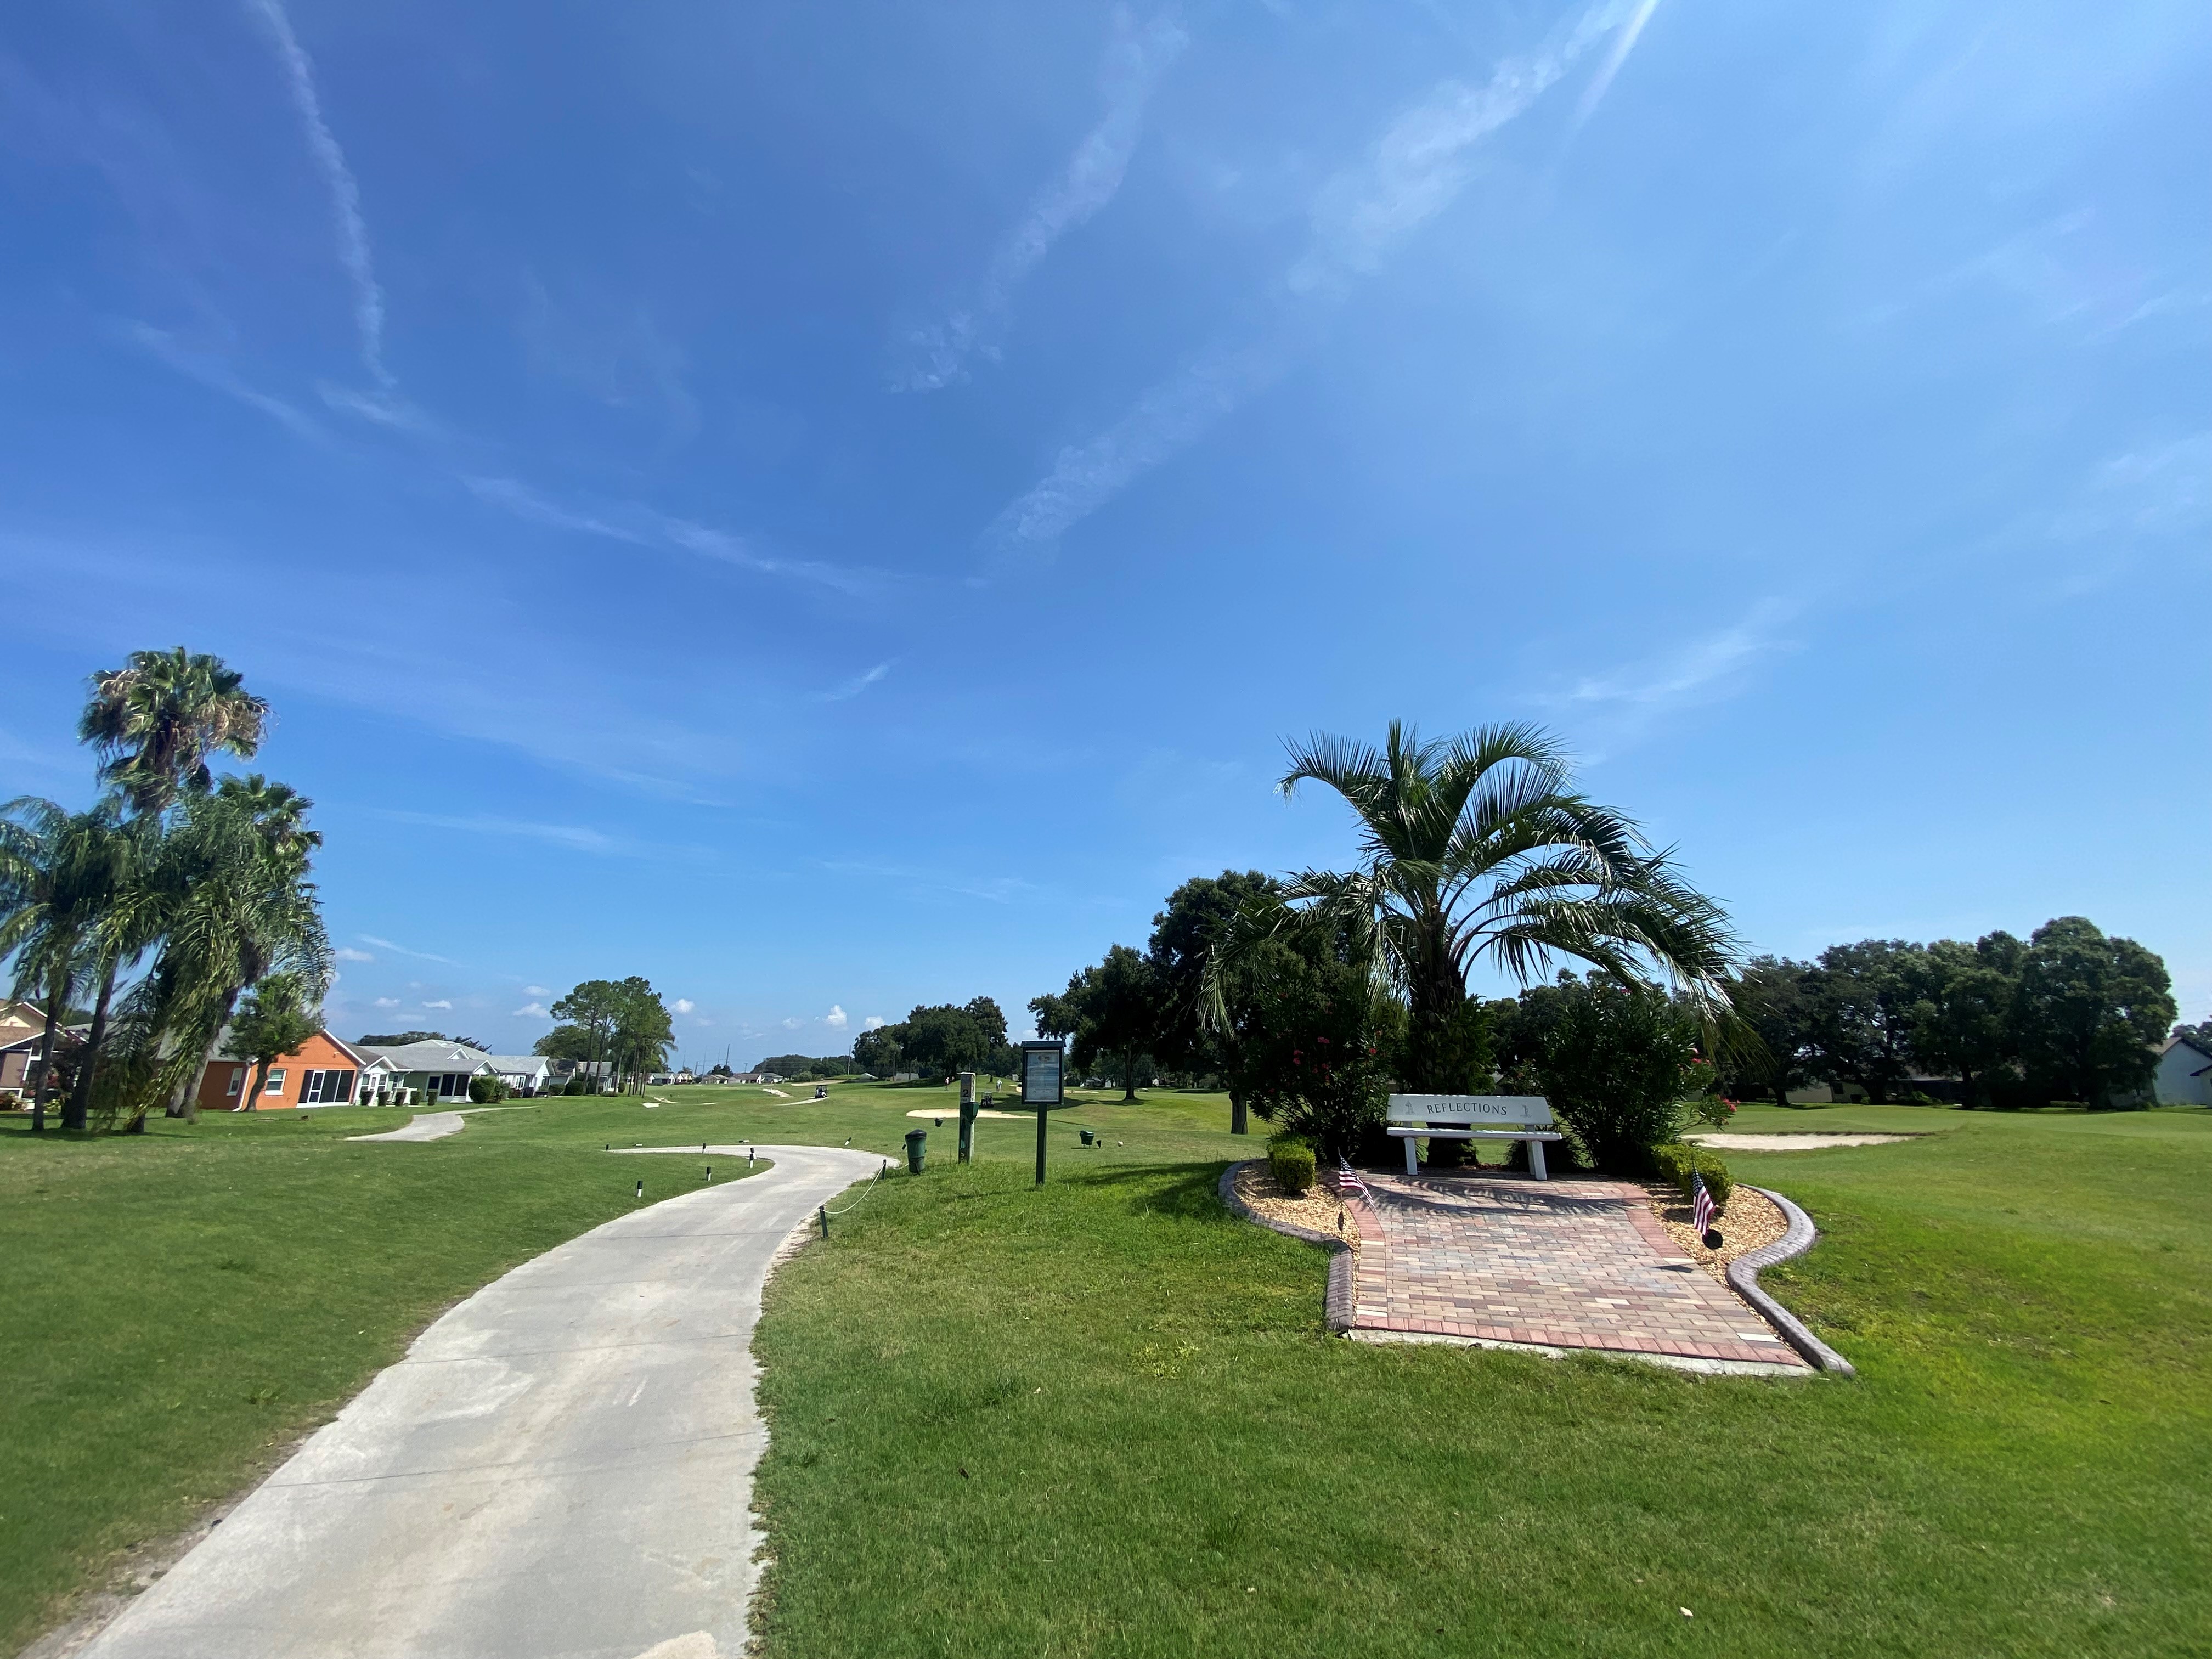 Sandpiper has a golf course that is open to the public.